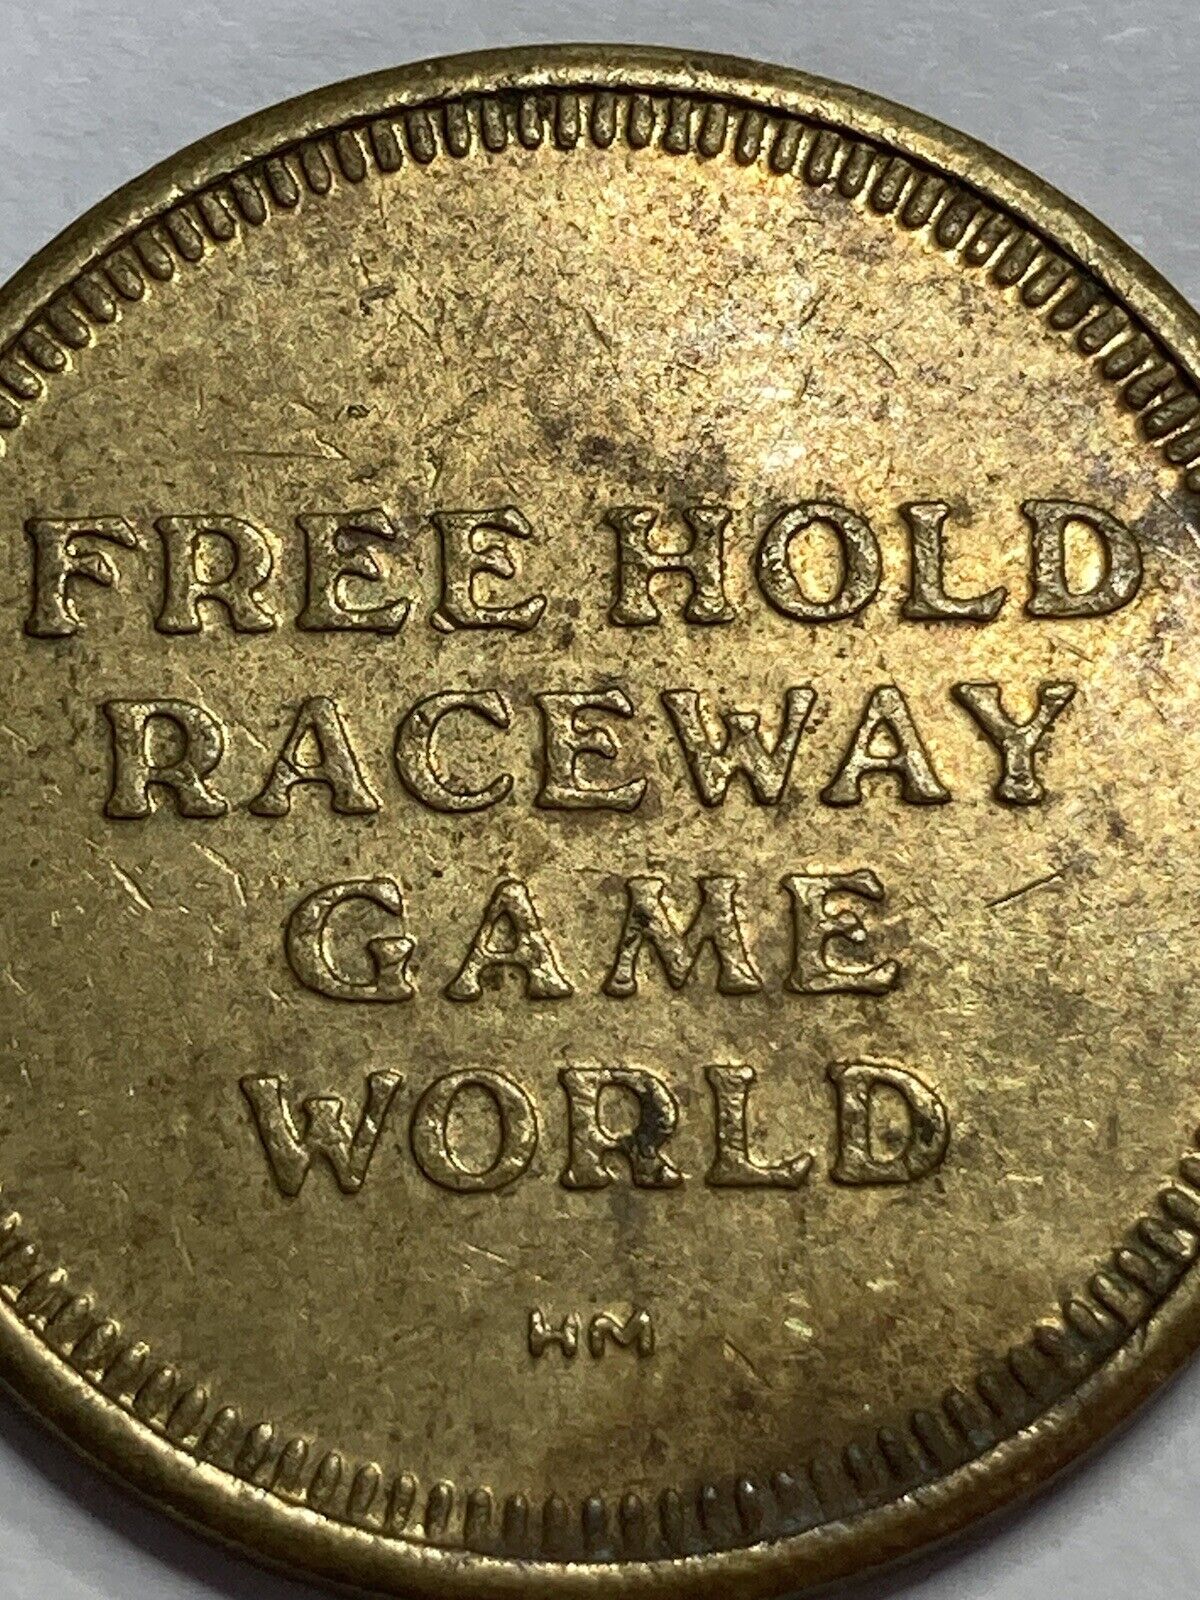 OLD FREEHOLD RACEWAY - GAME WORLD VIDEO GAME ARCADE AMUSEMENT TOKEN - LOOK